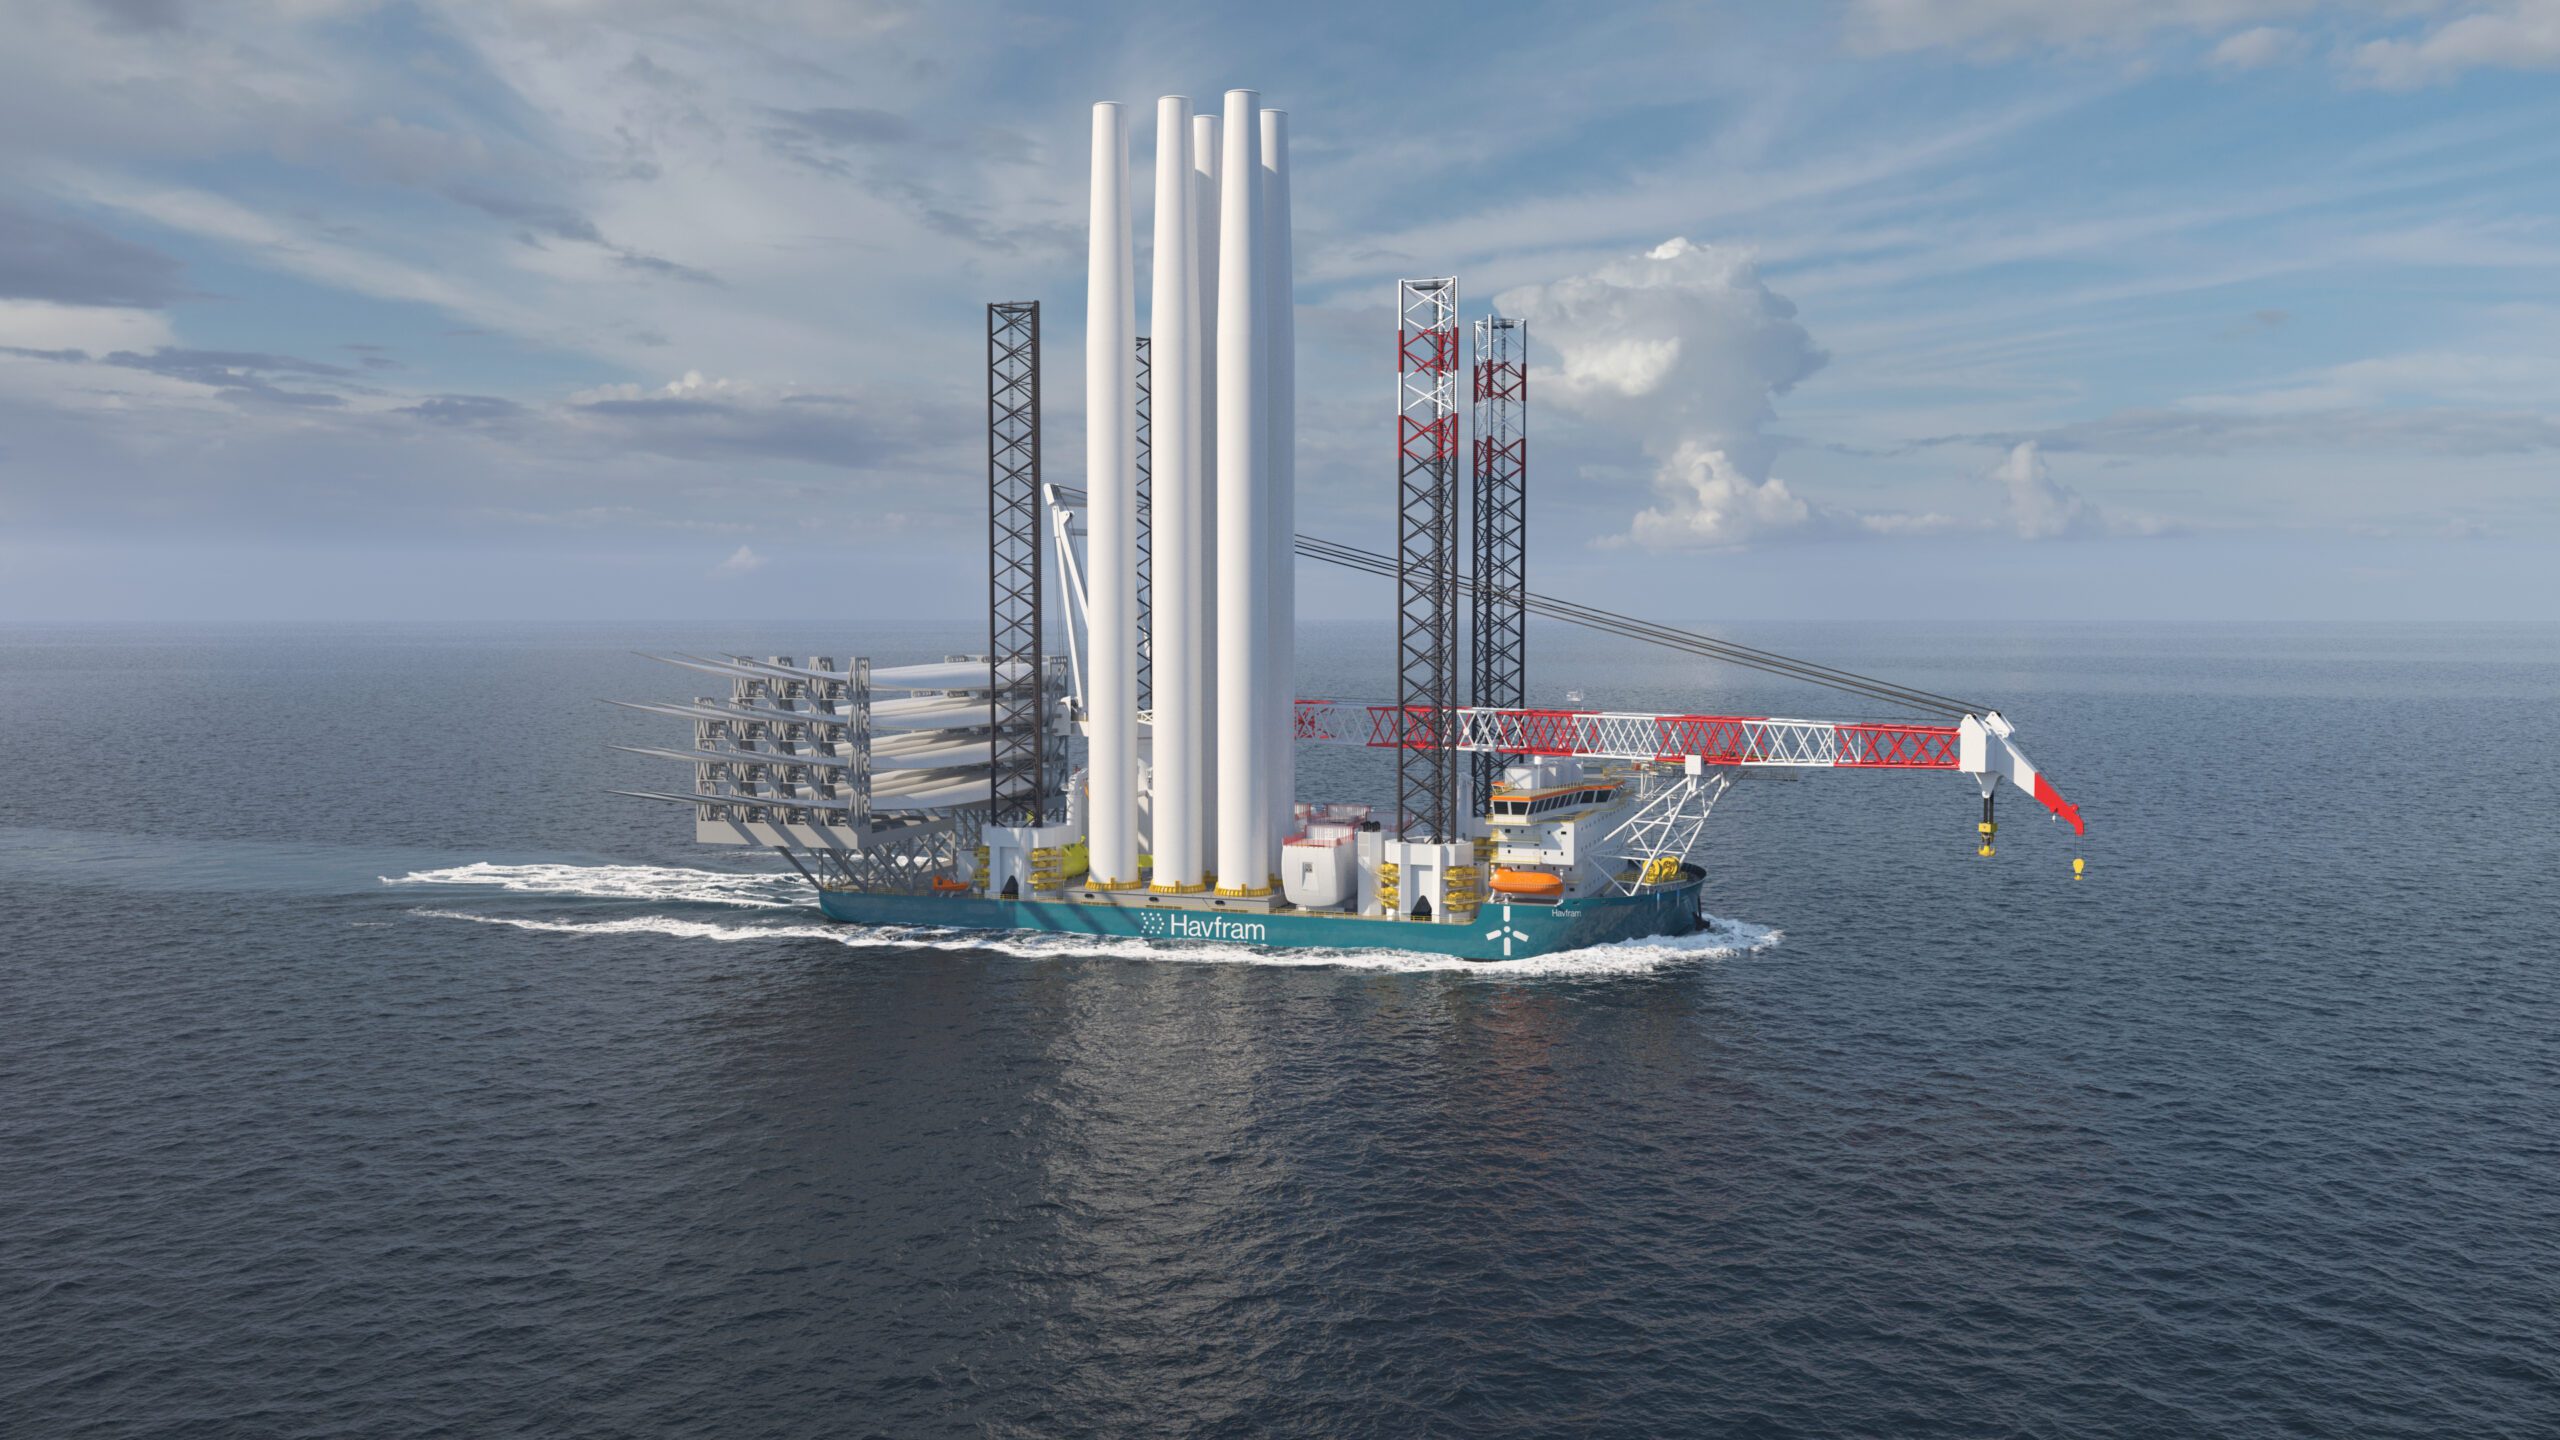 ABB Wins Large Systems Order For Havfram Wind S Two New Offshore Wind Turbine Installation Vessels